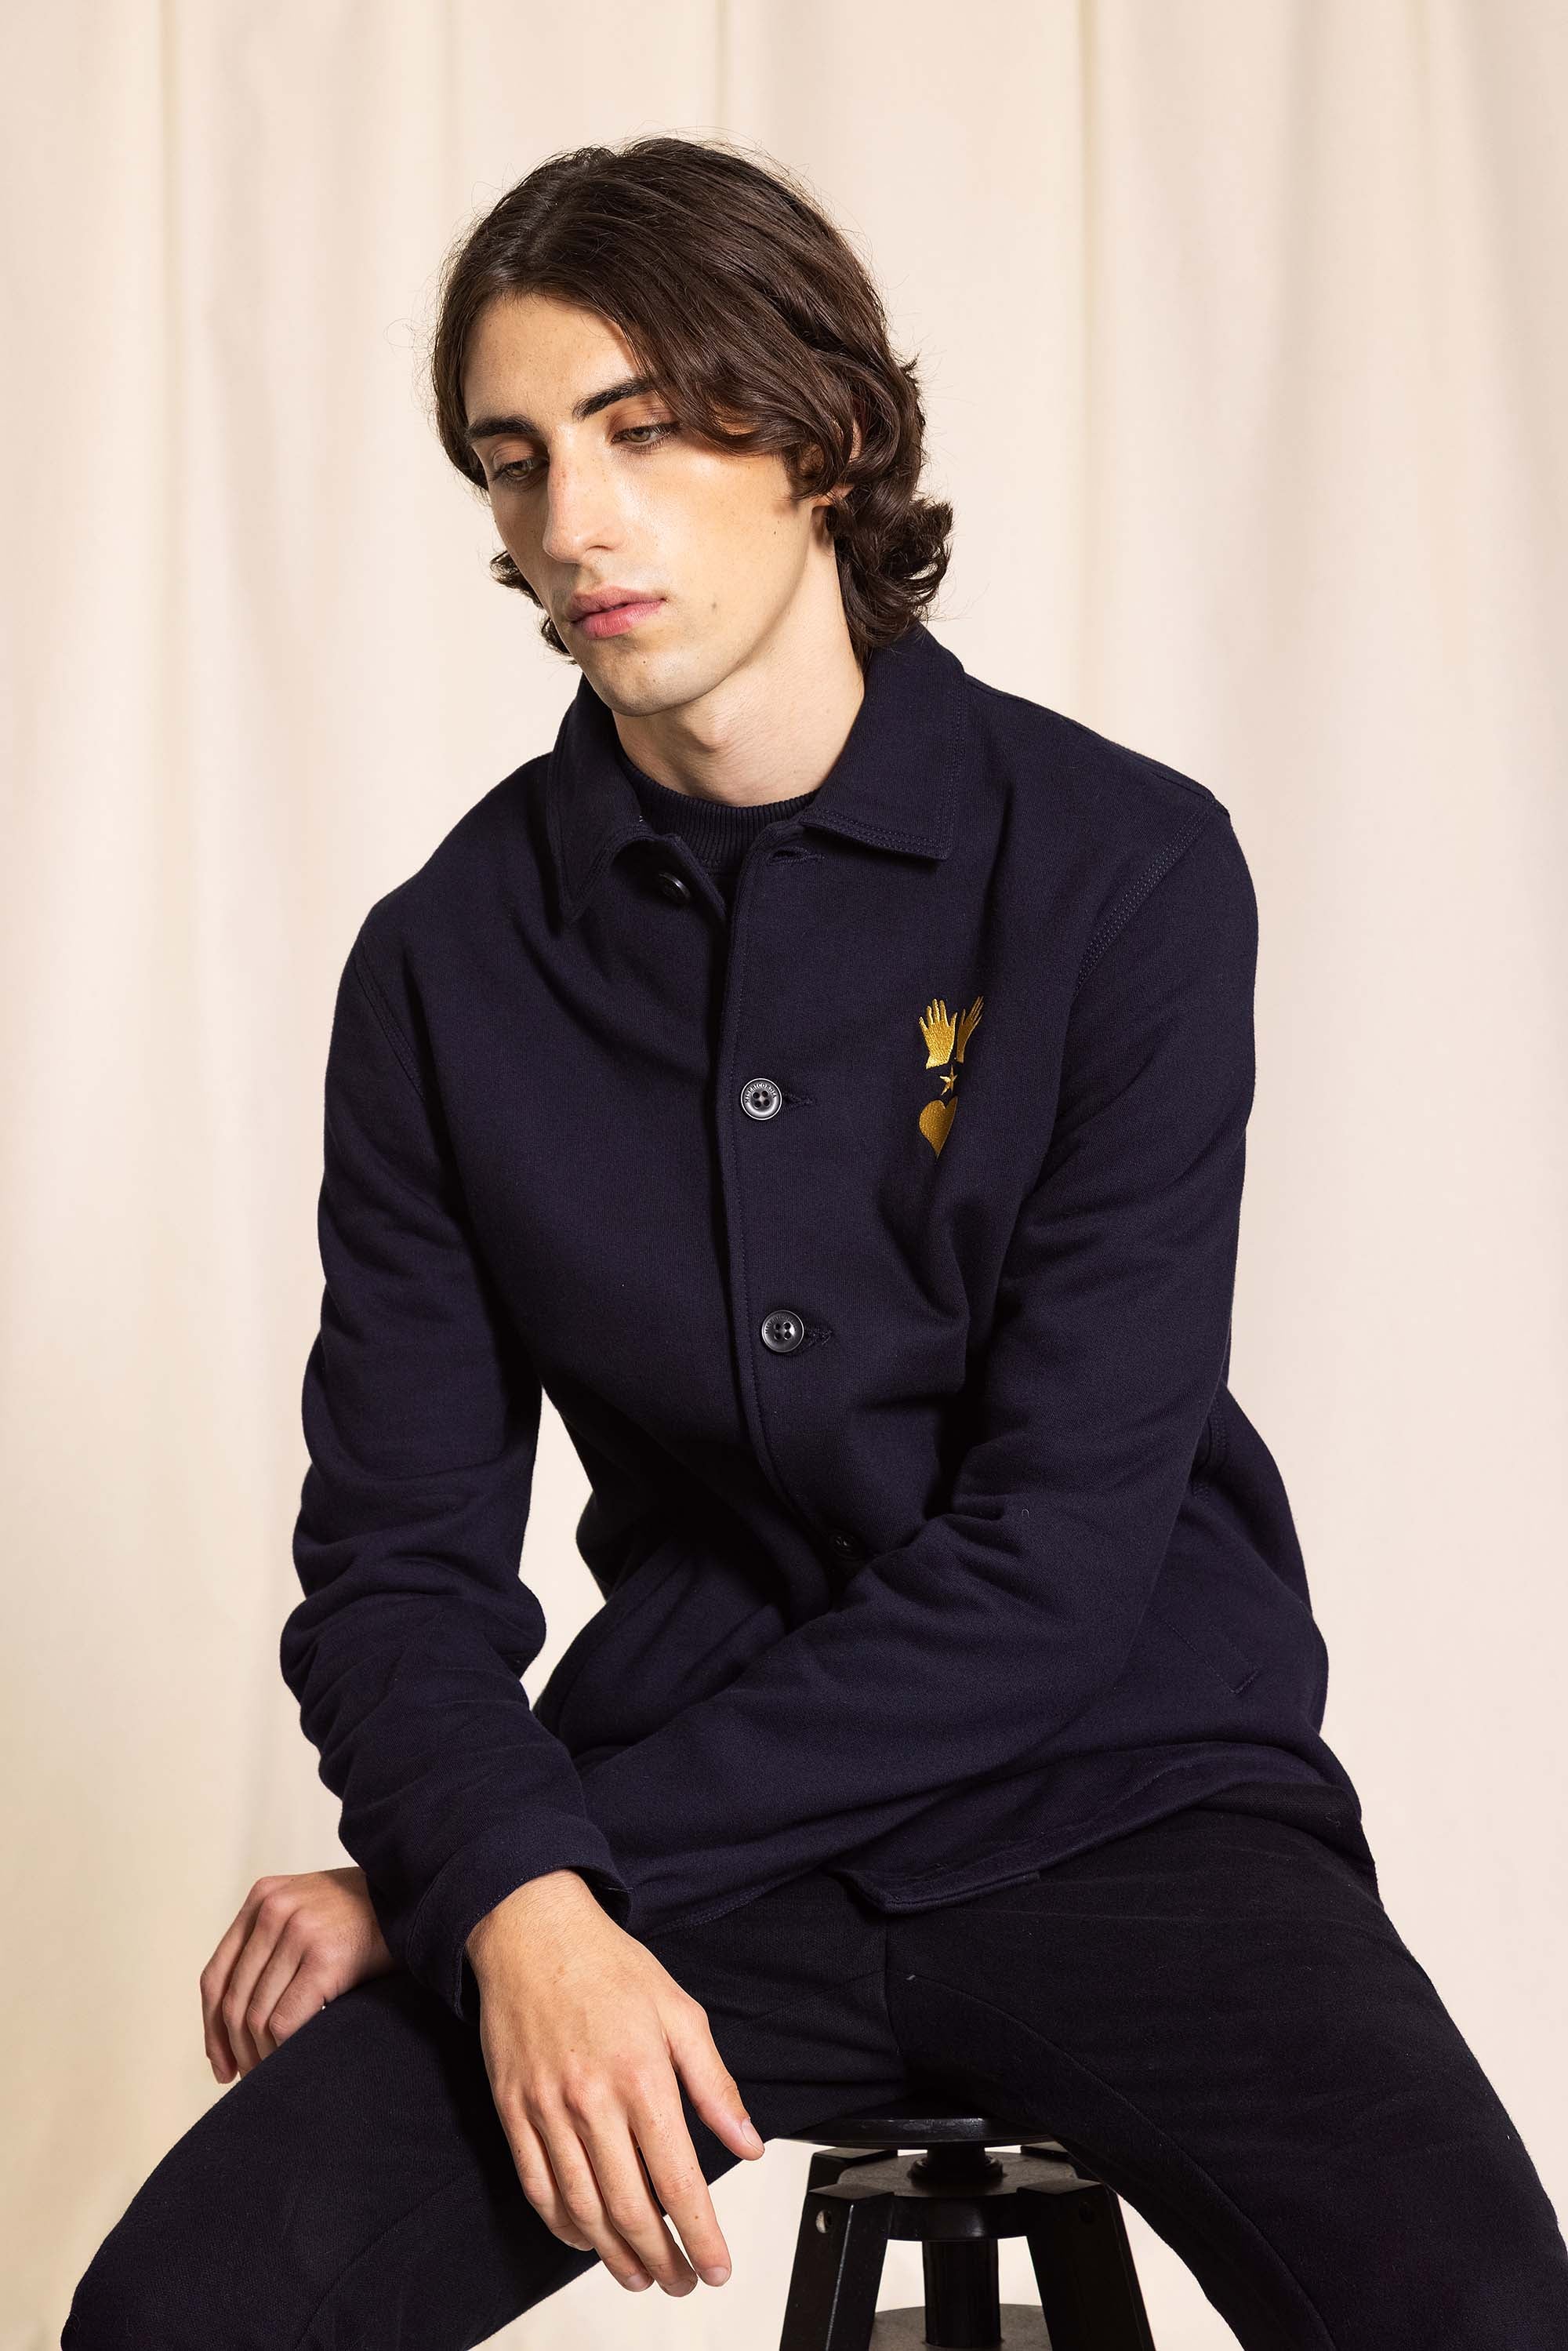 seated man wearing a navy estevez jacket buttoned and embroidered on the chest, worn with shirts t-shirts or under-sweaters